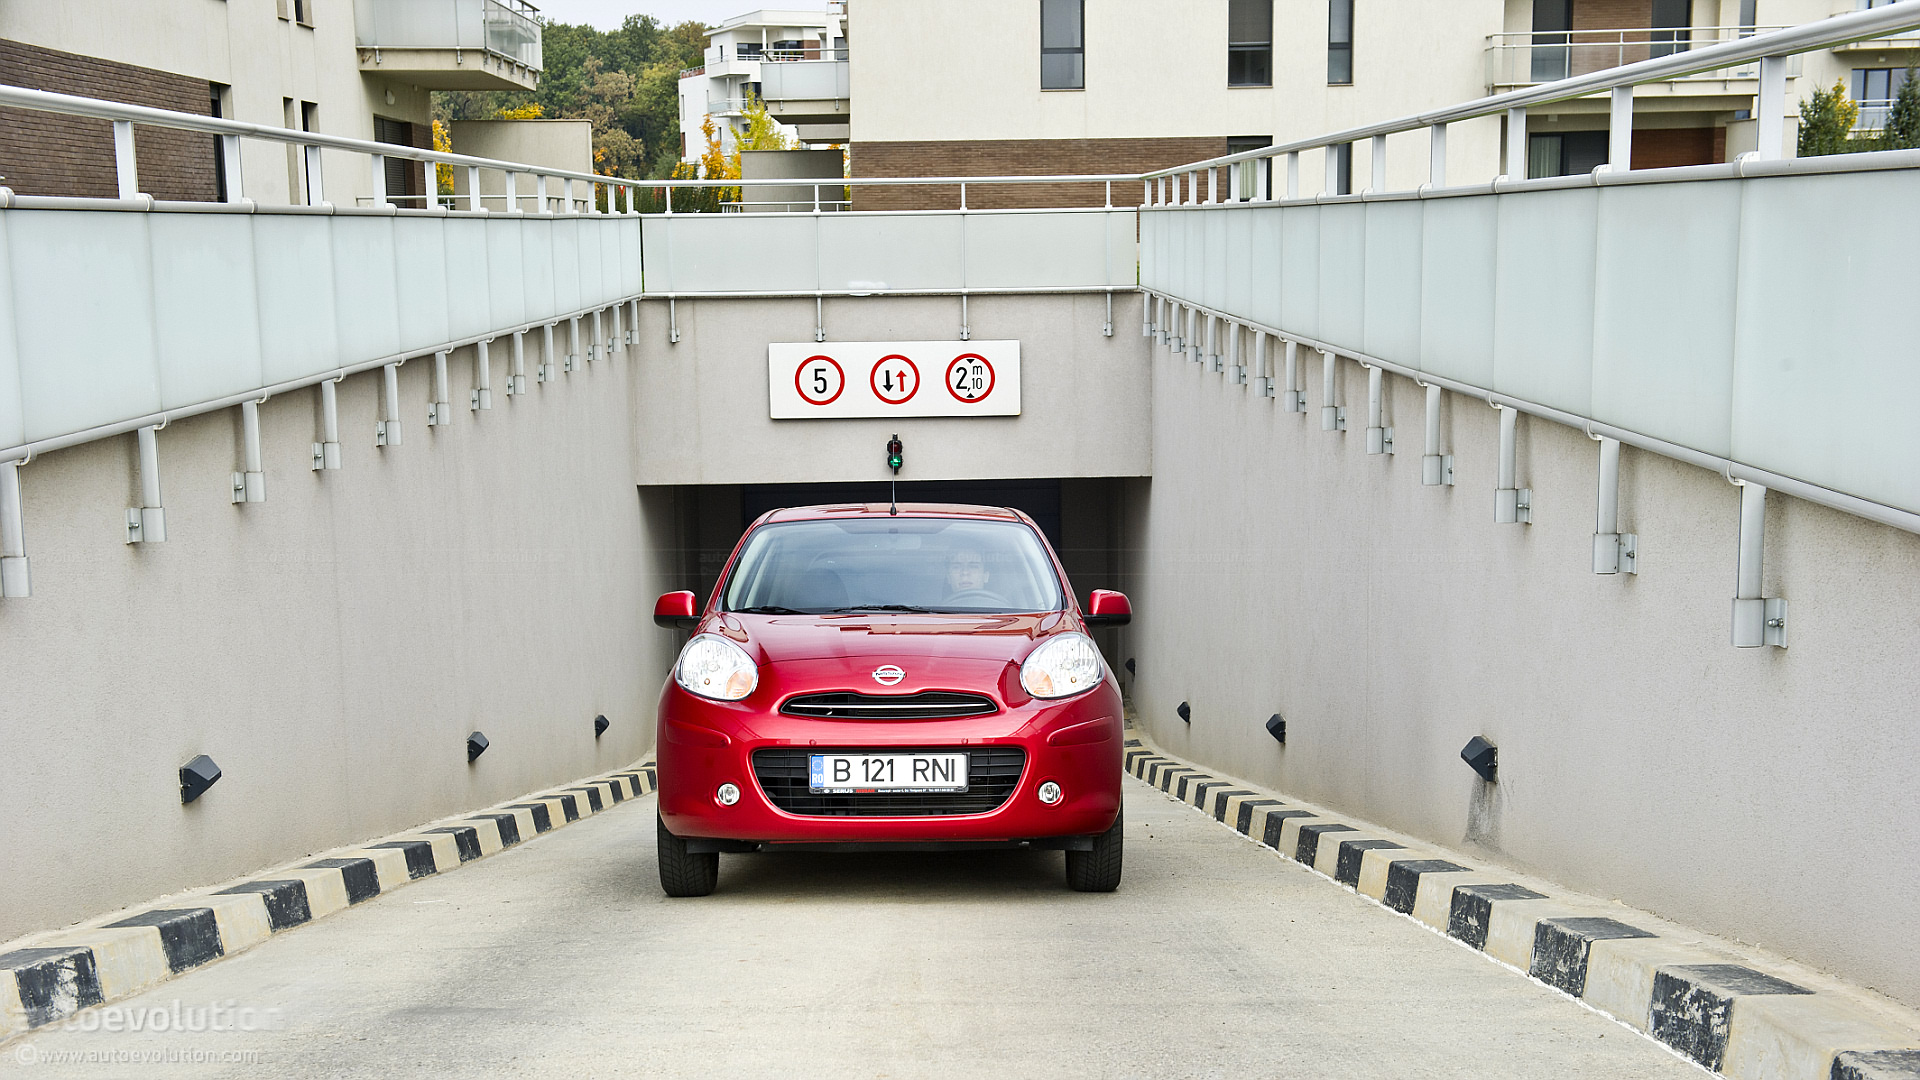 2011 Nissan micra safety rating #2